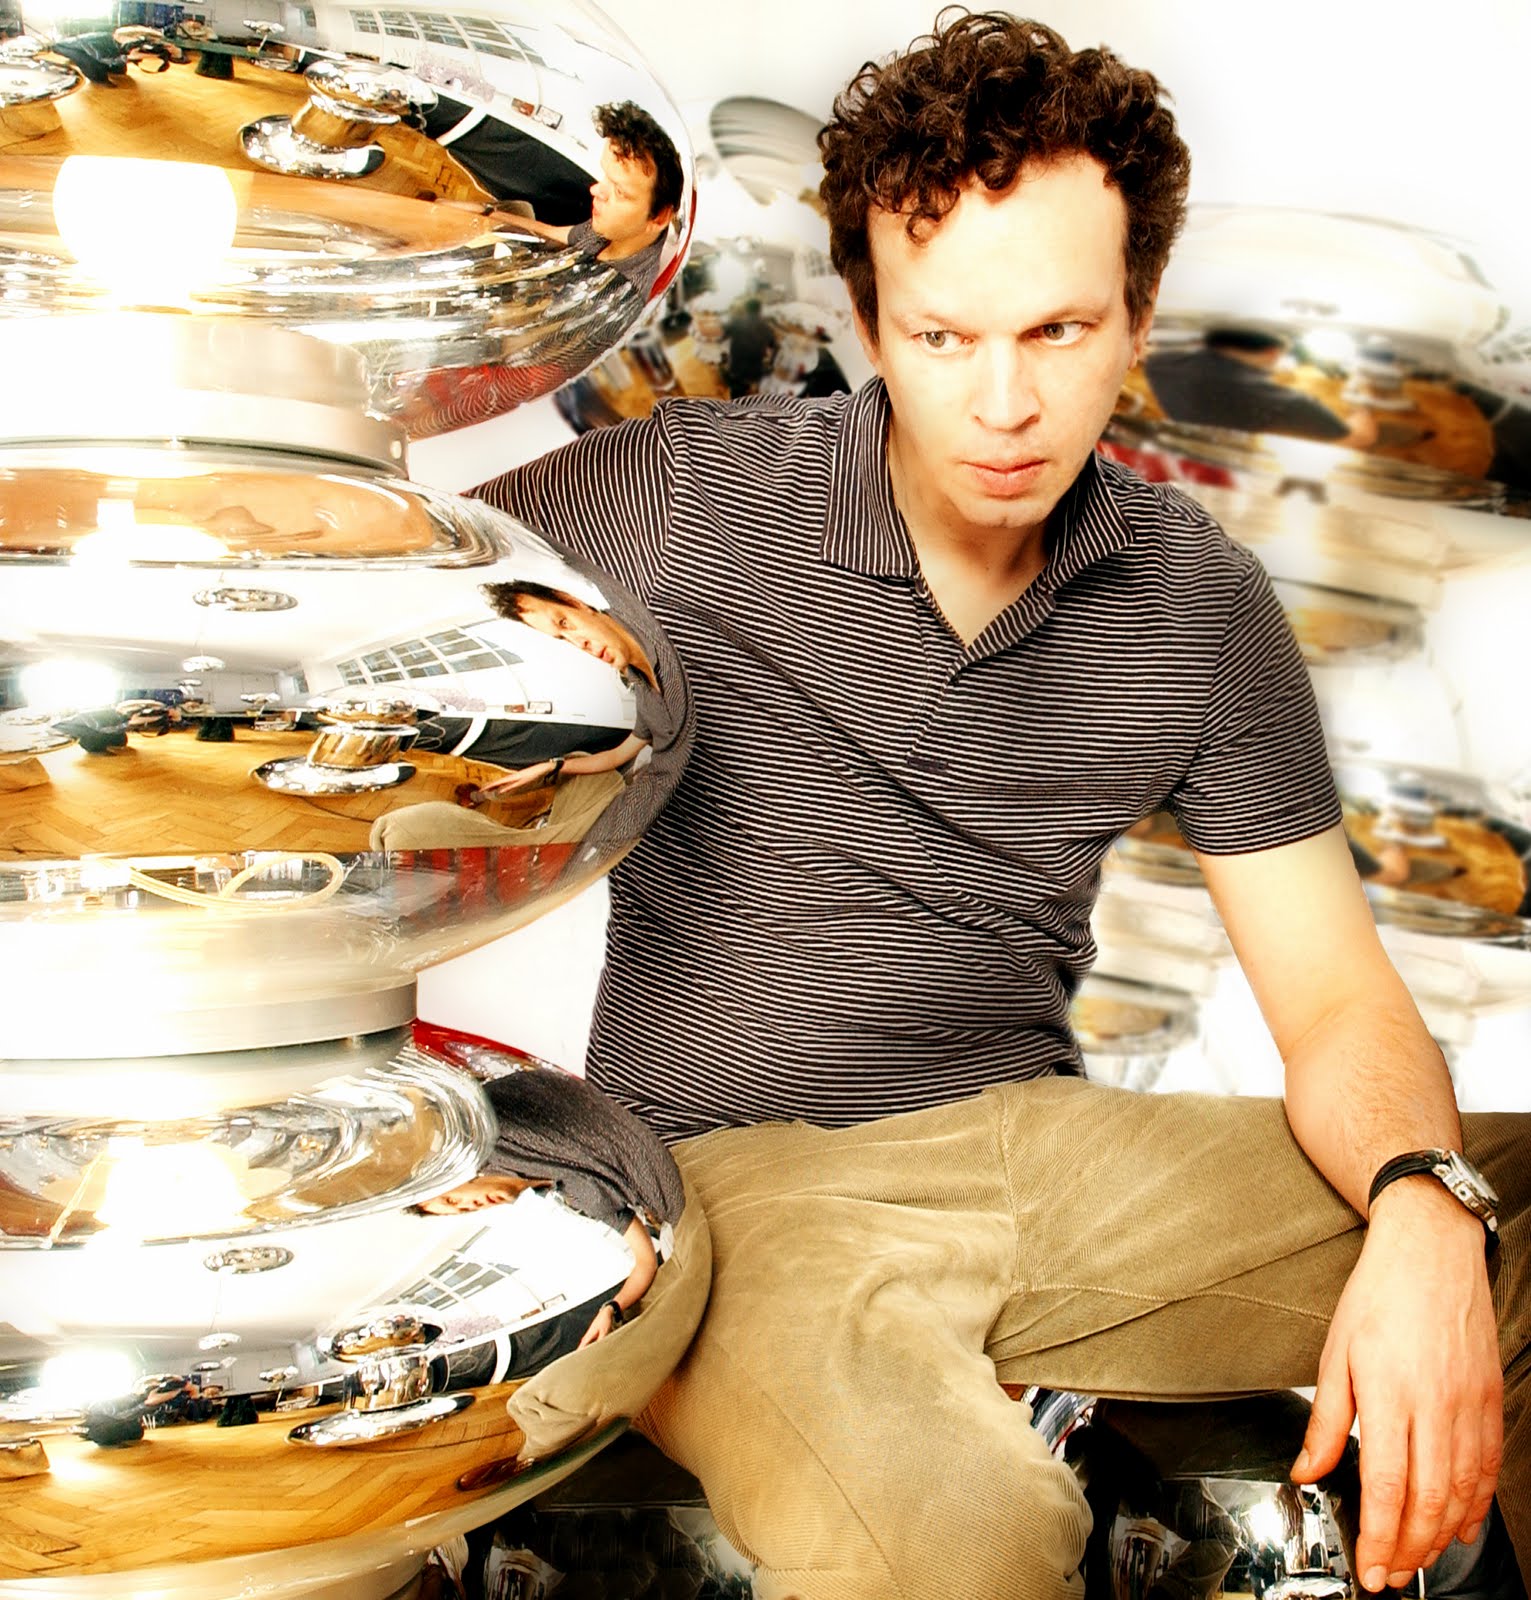 "Tom Dixon, born in Sfax, Tunisia in 1959, to a French/Latvian mother and an English father, Tom moved to England aged four and spent his school years in London. Attending Chelsea Art School for a brief six-month period, a motorbike accident curtailed any artistic ambition and left him in hospital for three months."